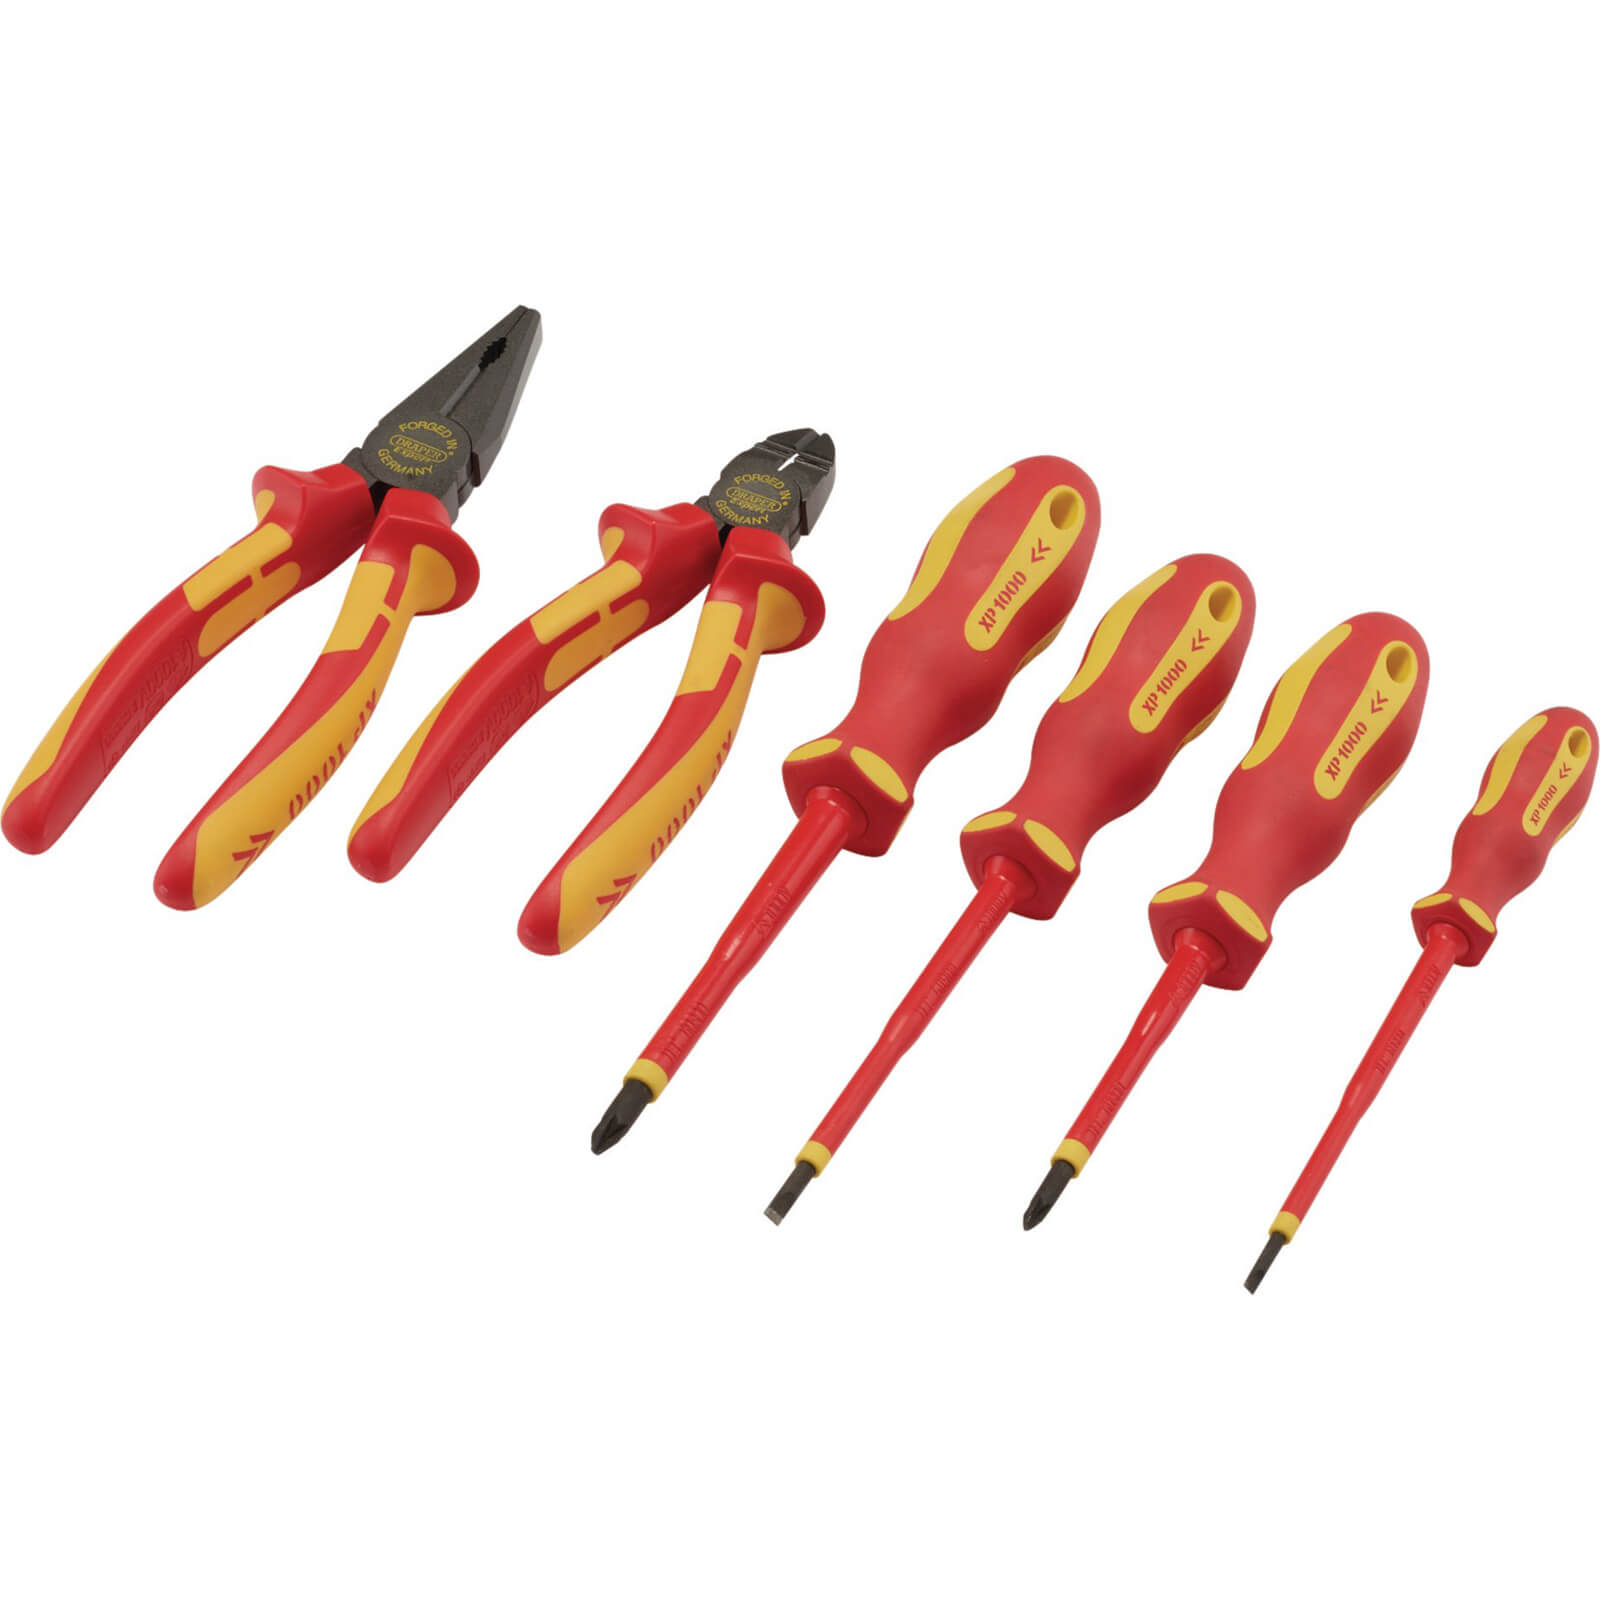 Image of Draper 6 Piece XP1000 VDE Insulated Screwdriver and Pliers Set